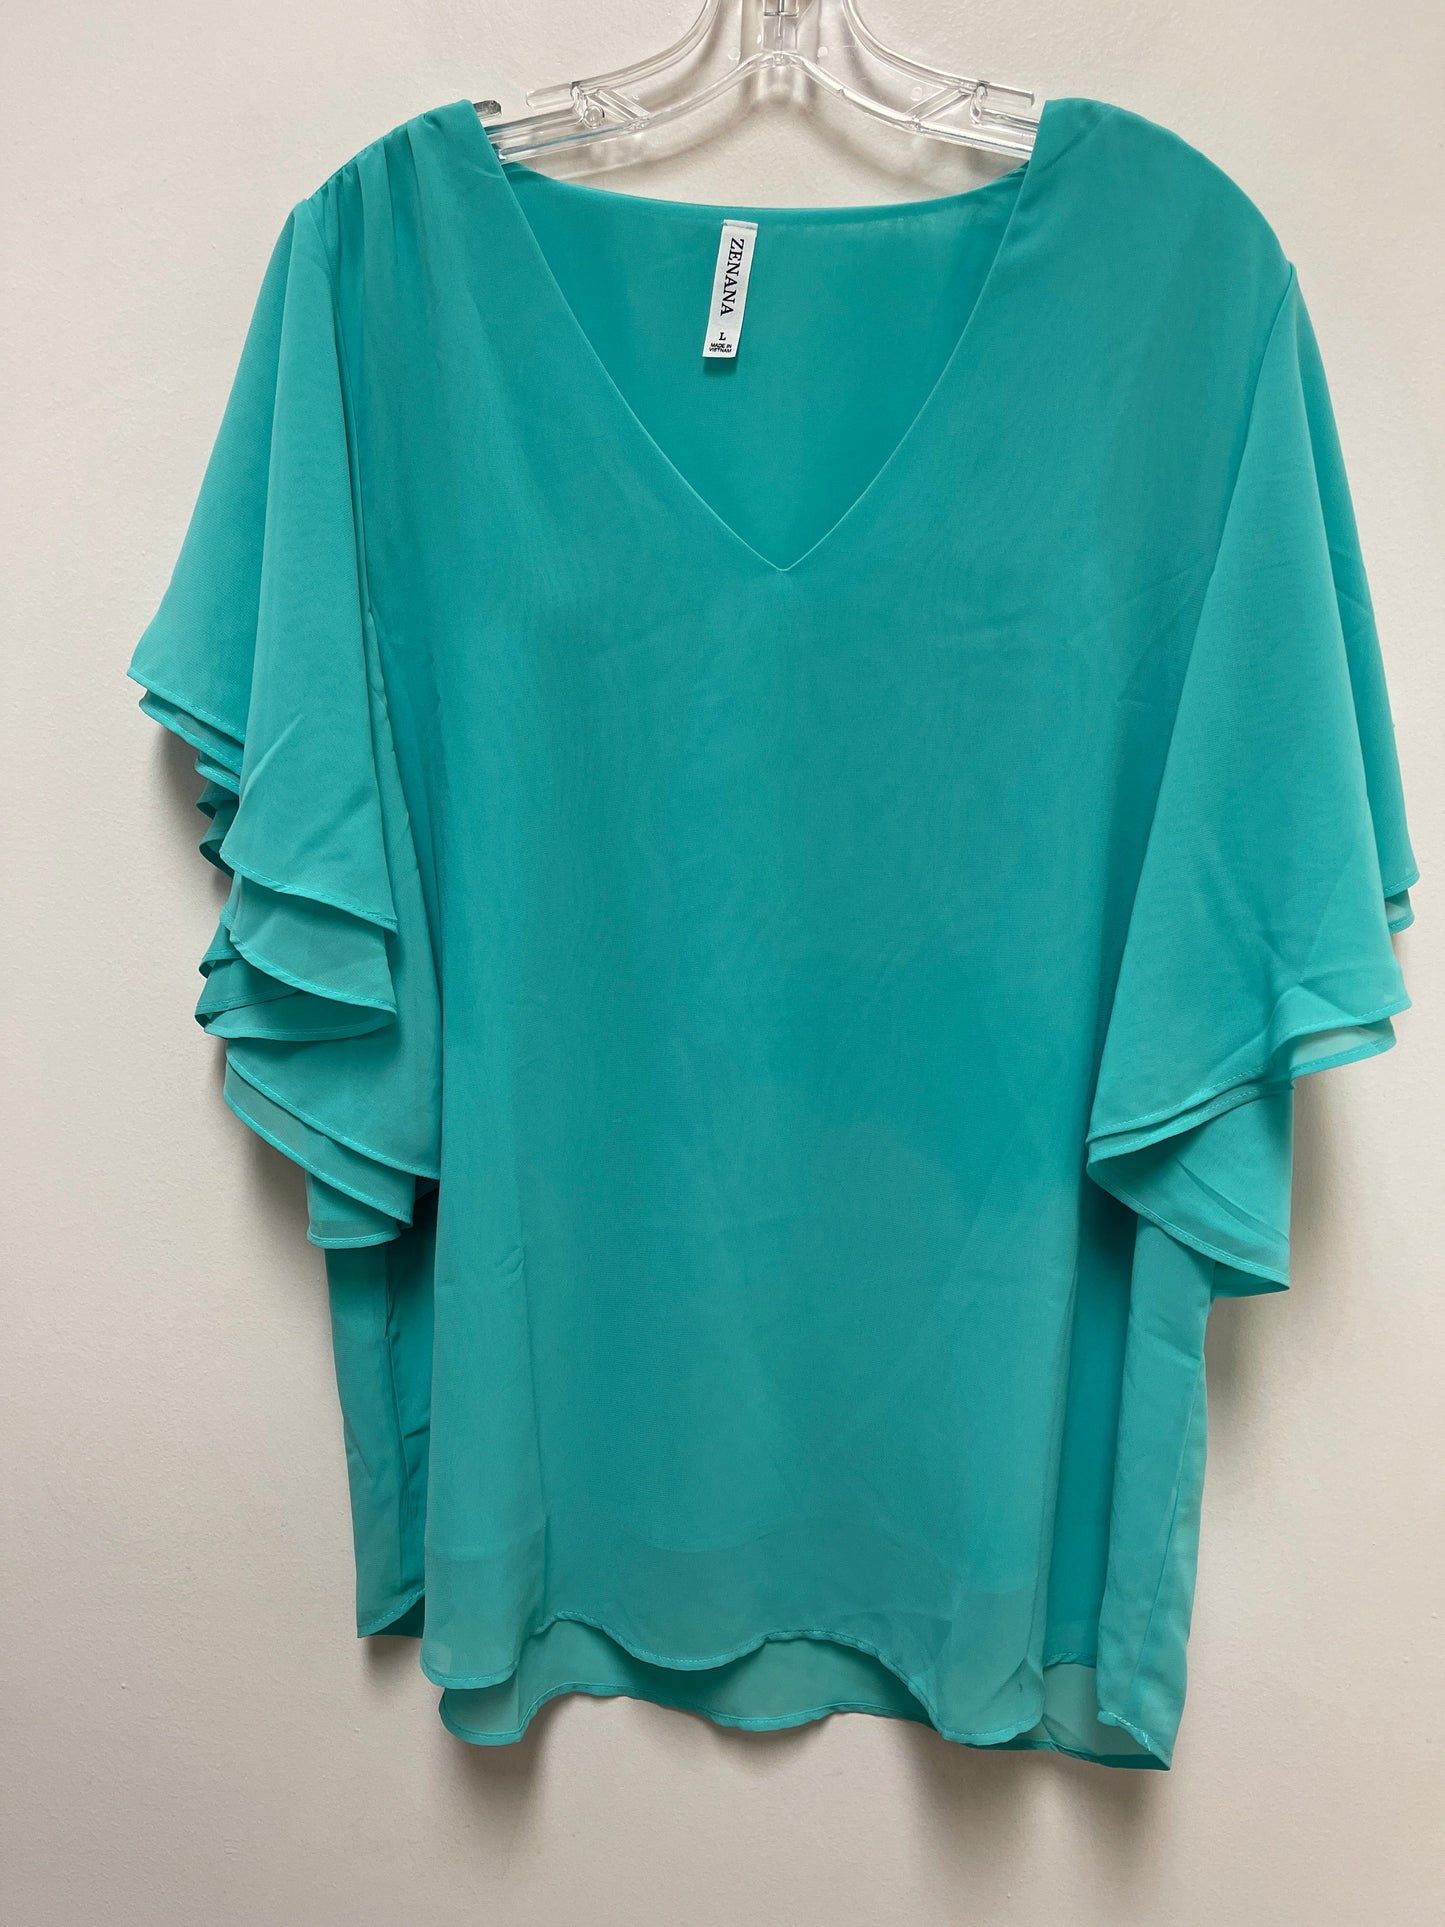 Green Top Short Sleeve Zenana Outfitters, Size L